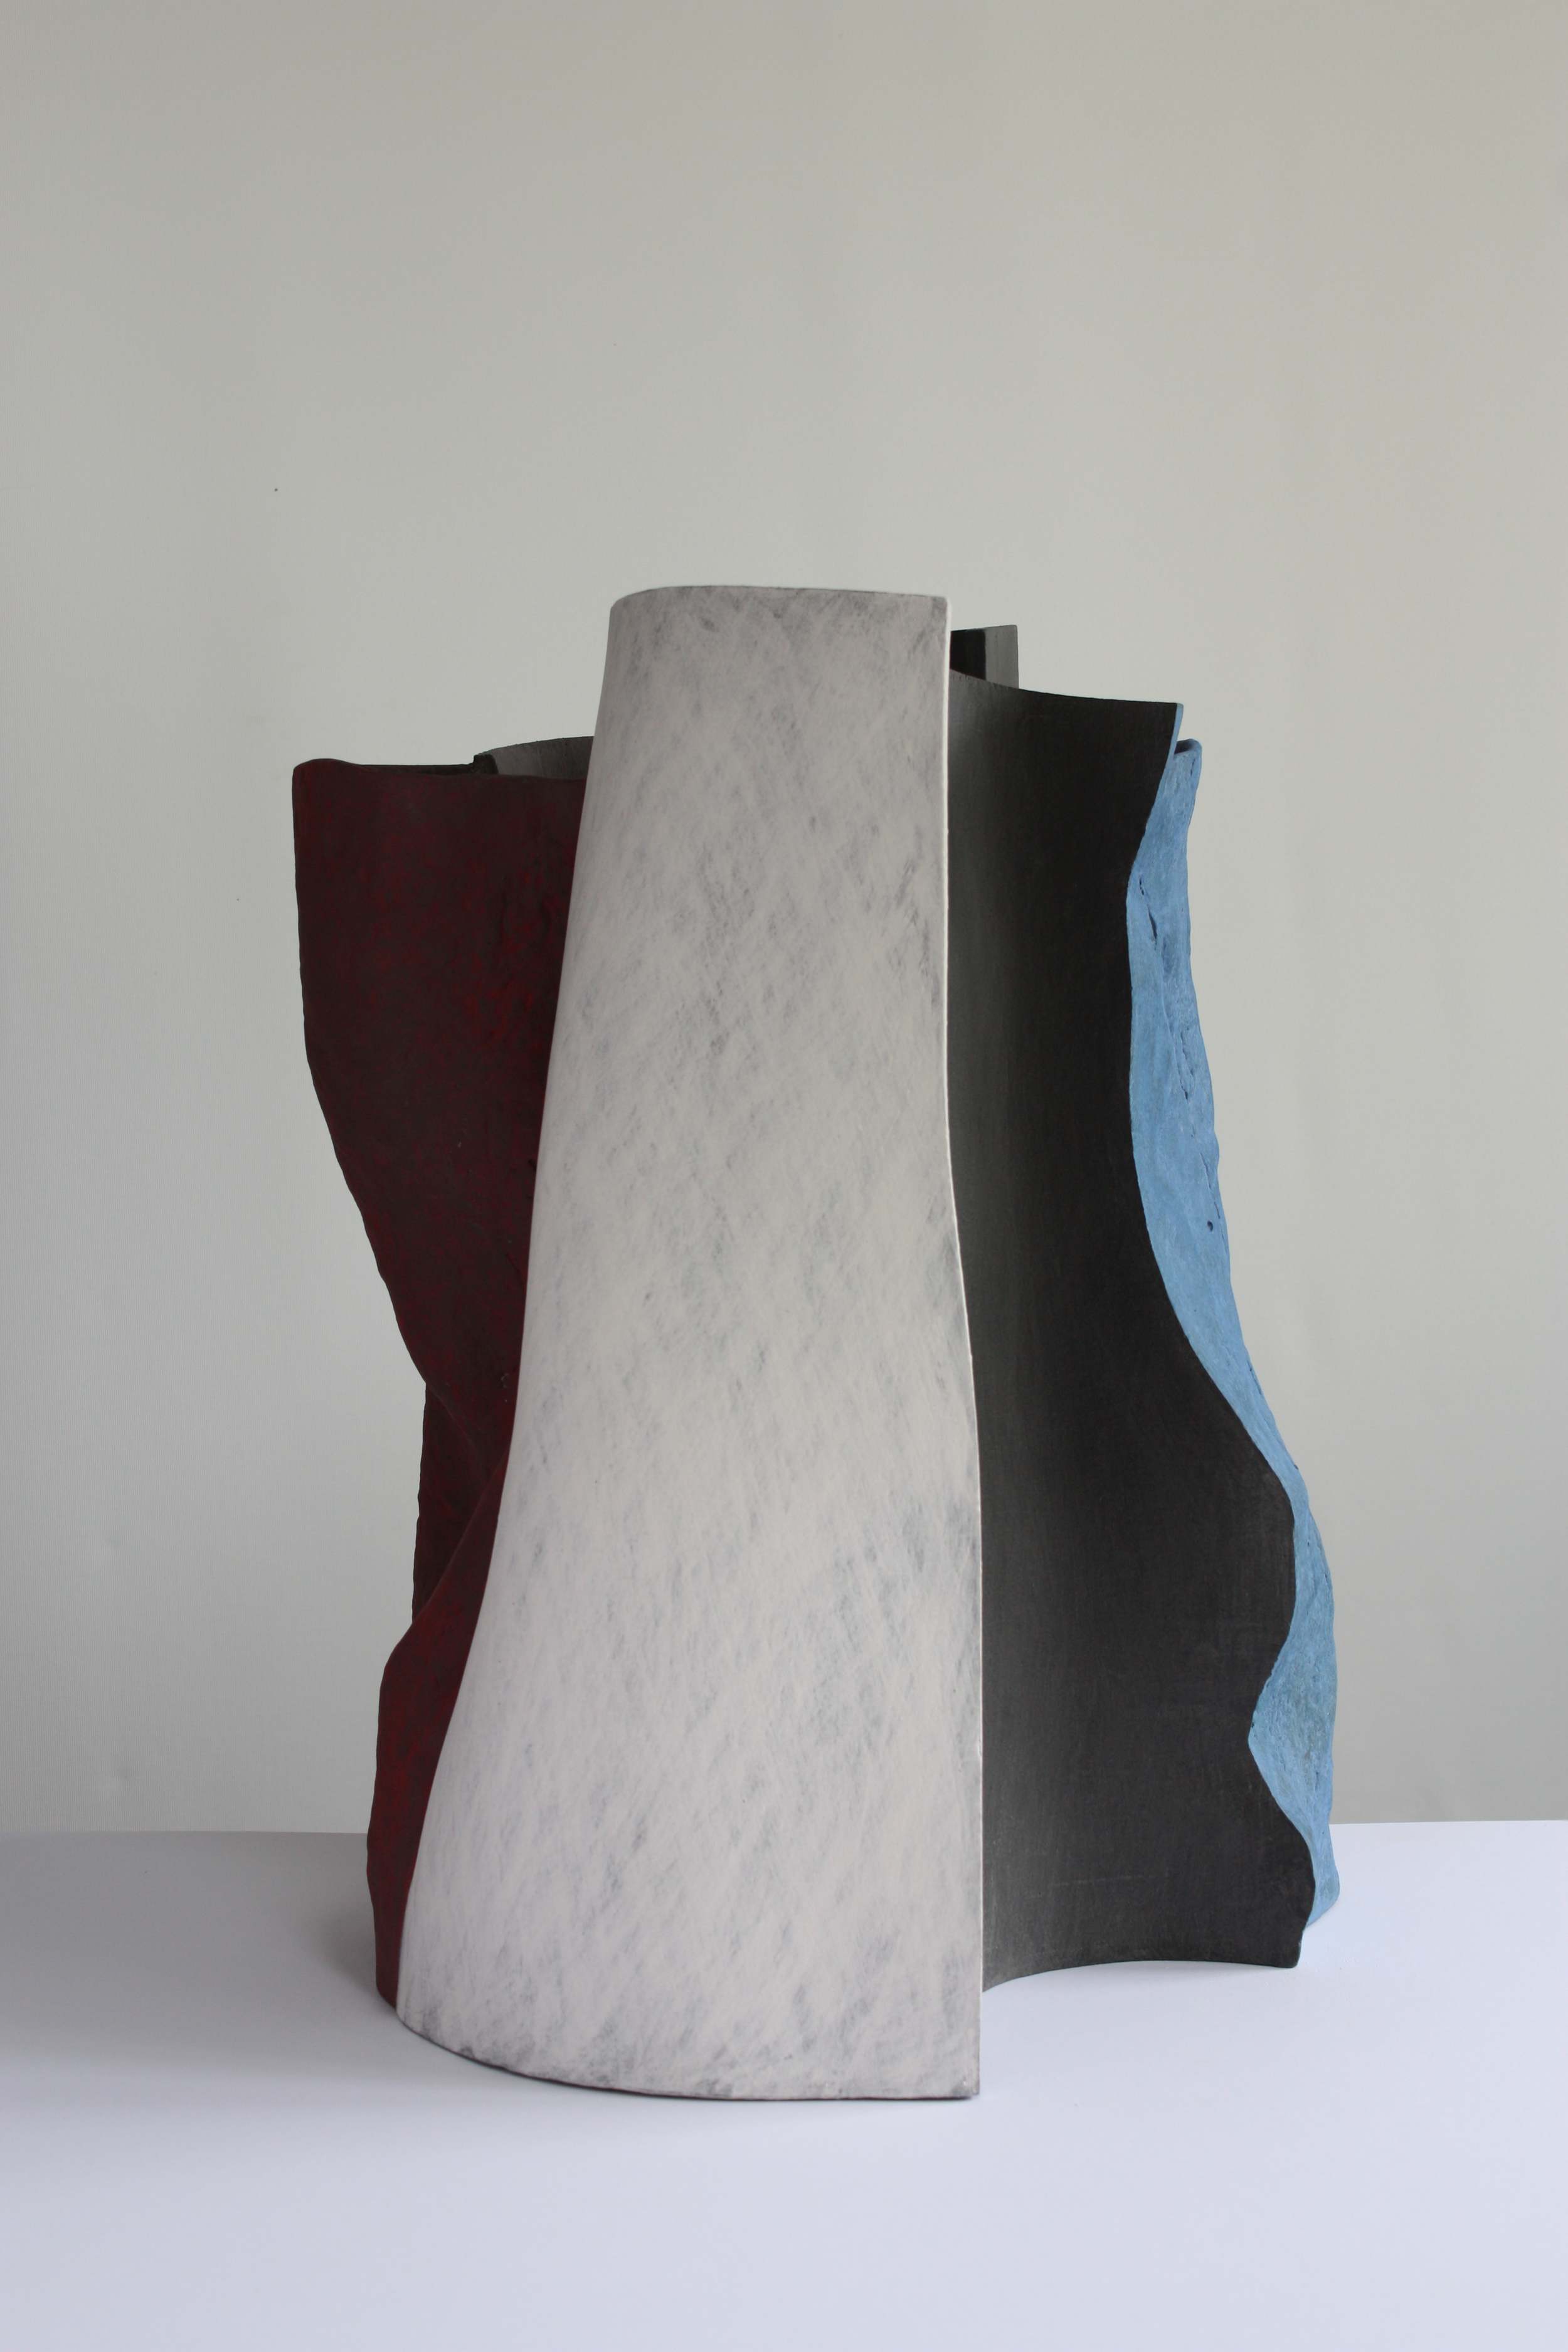 The imminent days, 2012, 48cm high